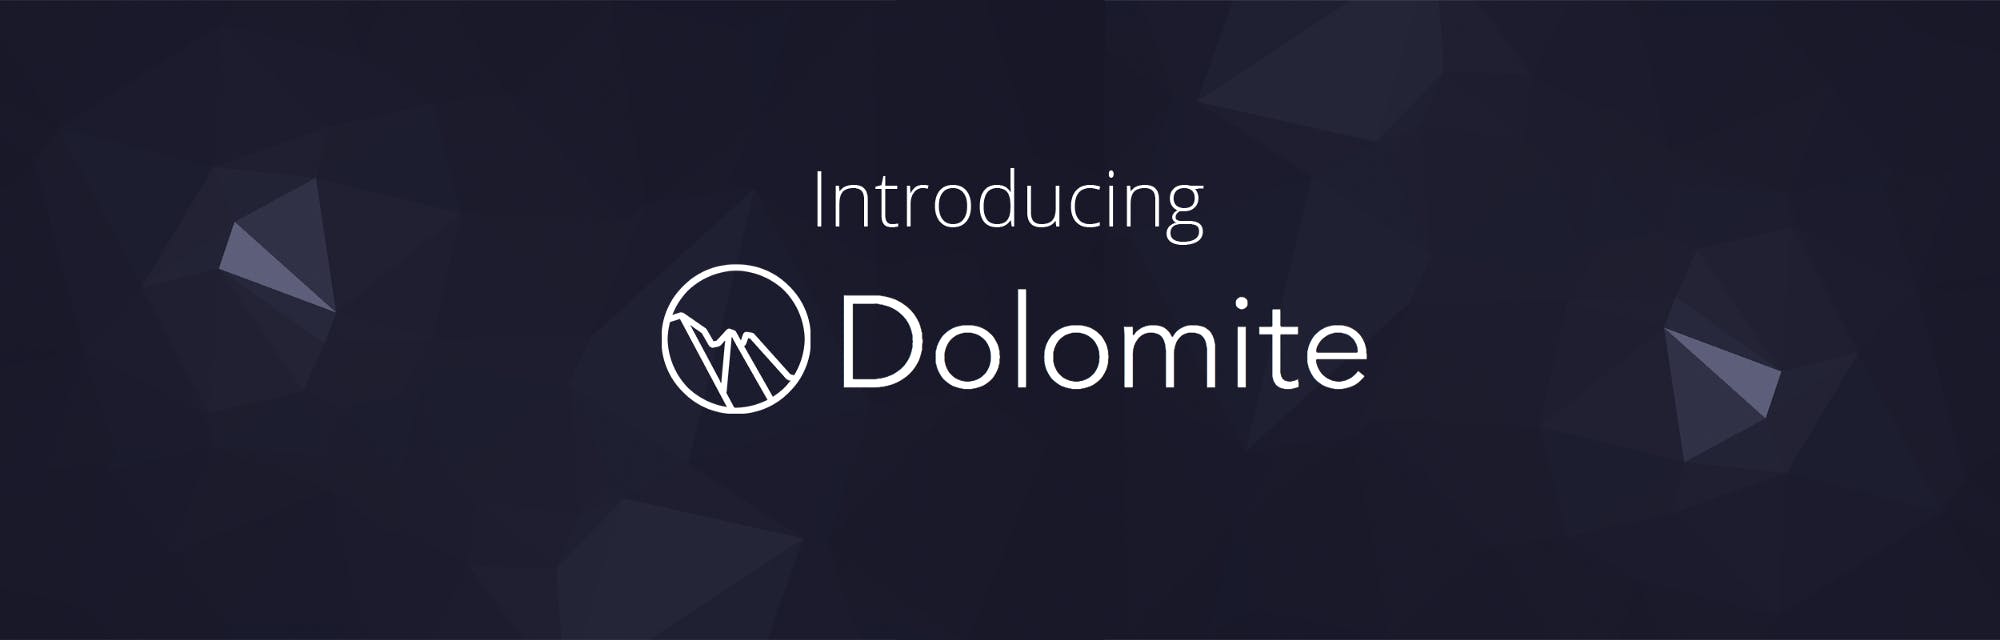 /dolomite-decentralized-exchange-powering-the-blockchain-economy-through-ux-security-and-a6fb4aa8bffa feature image